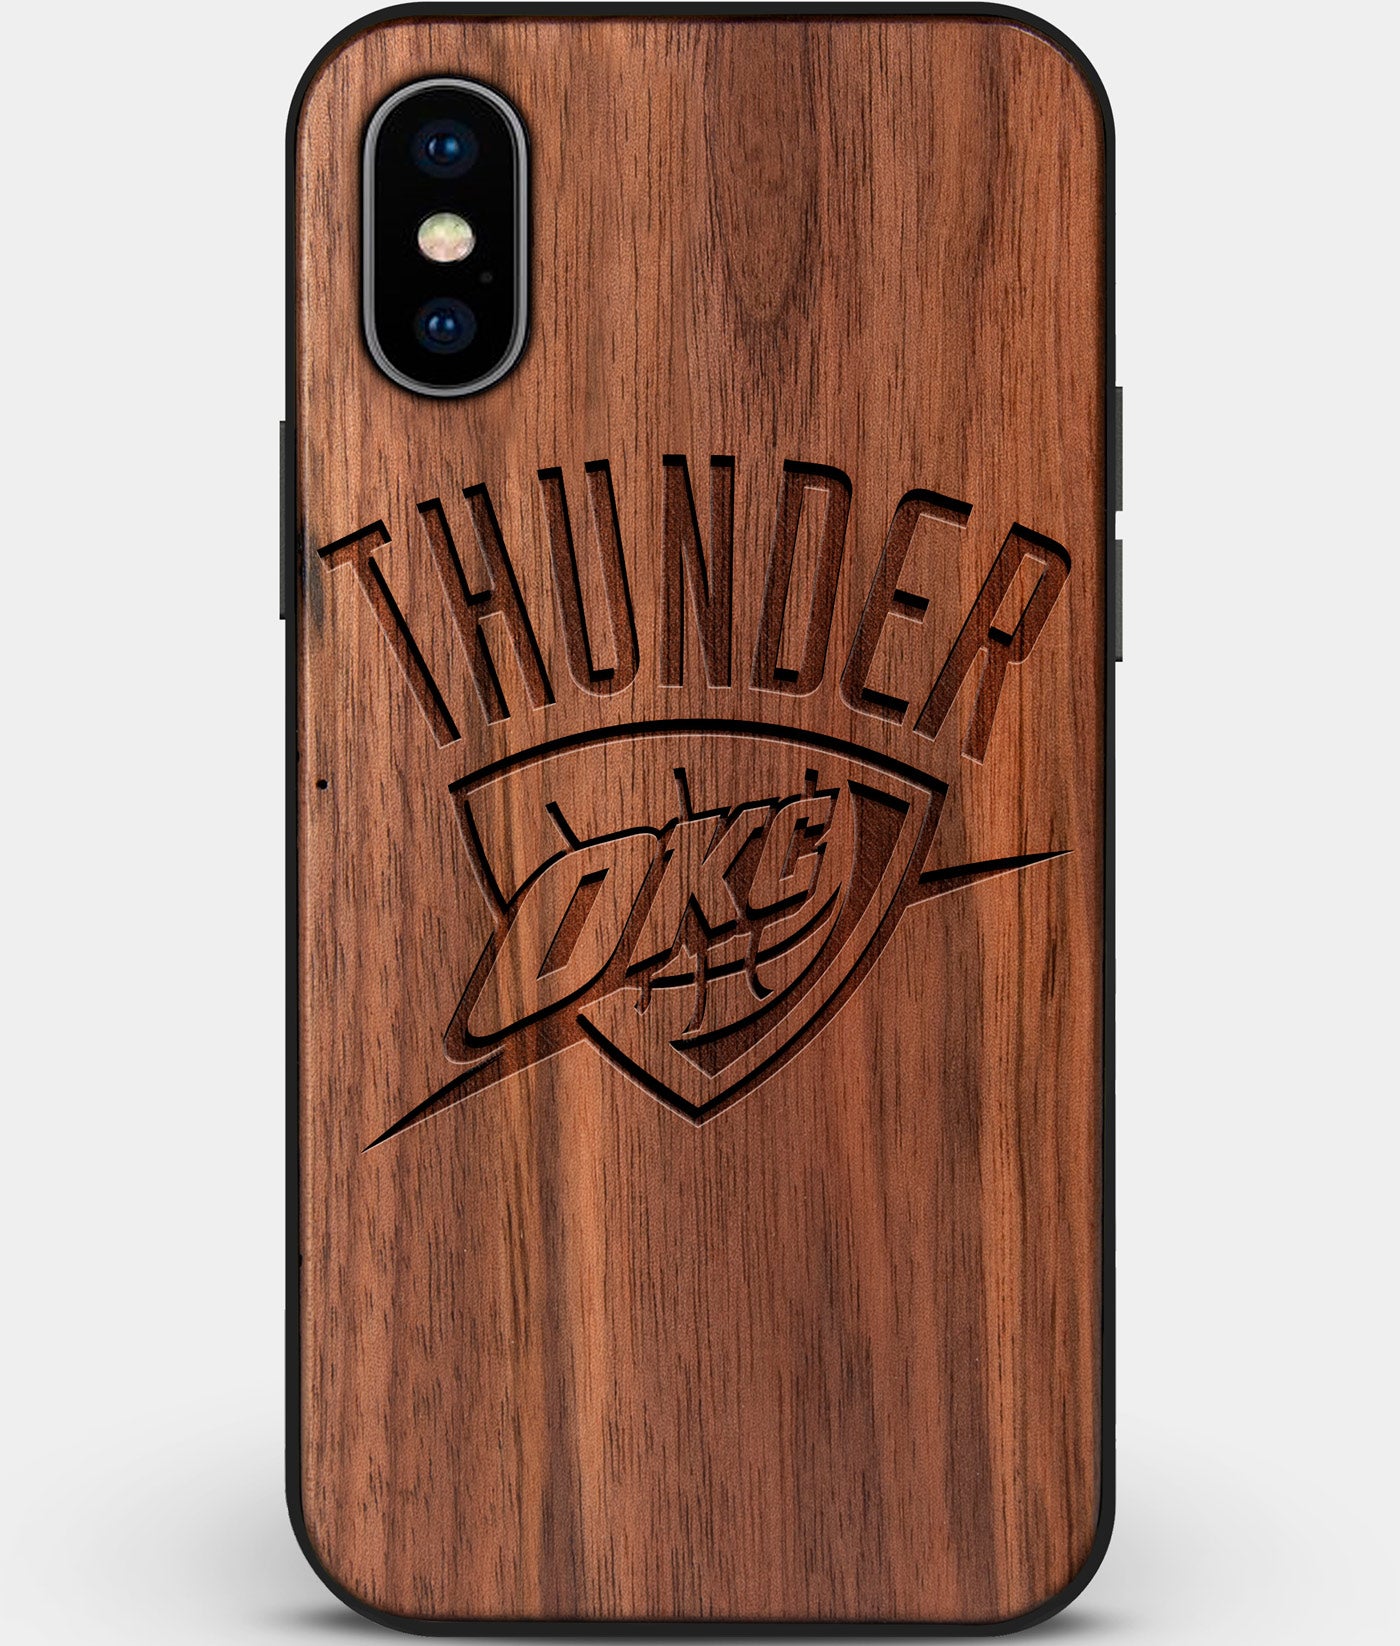 Custom Carved Wood OKC Thunder iPhone X/XS Case | Personalized Walnut Wood OKC Thunder Cover, Birthday Gift, Gifts For Him, Monogrammed Gift For Fan | by Engraved In Nature